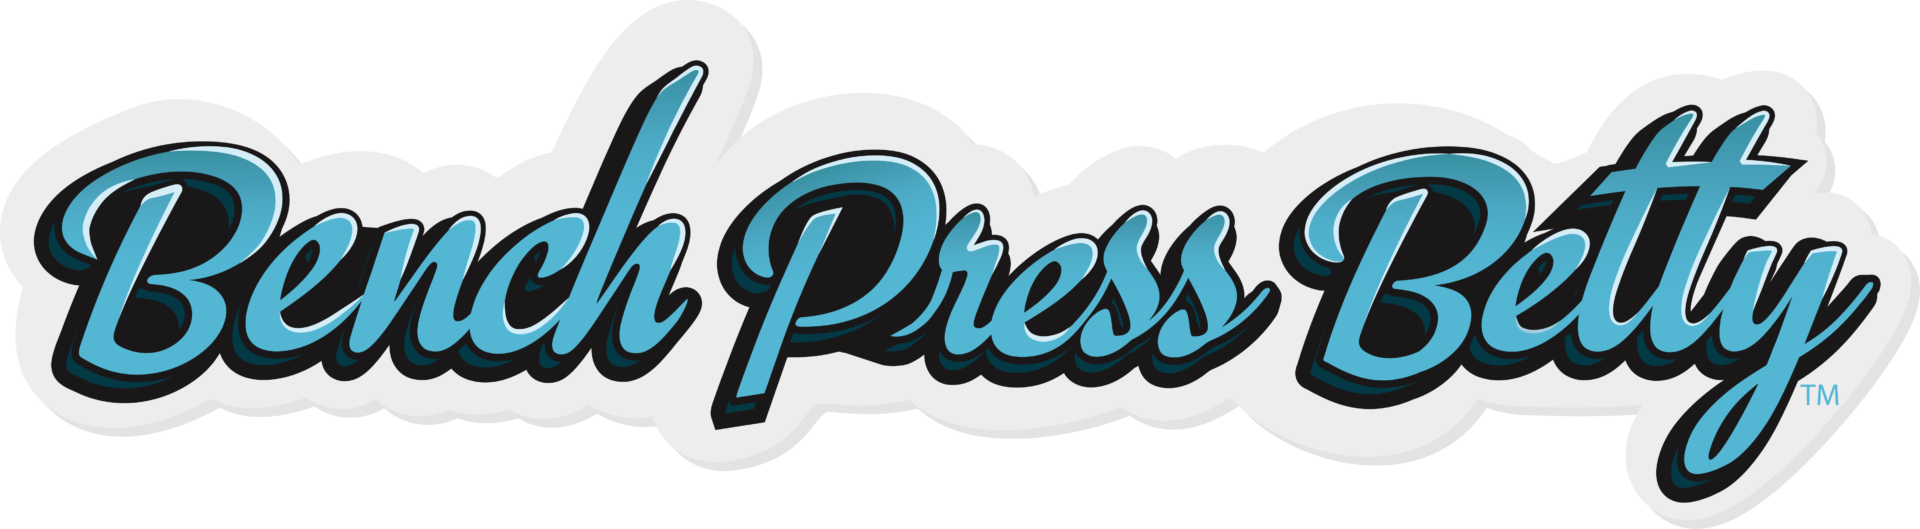 A green background with the word press written in blue.